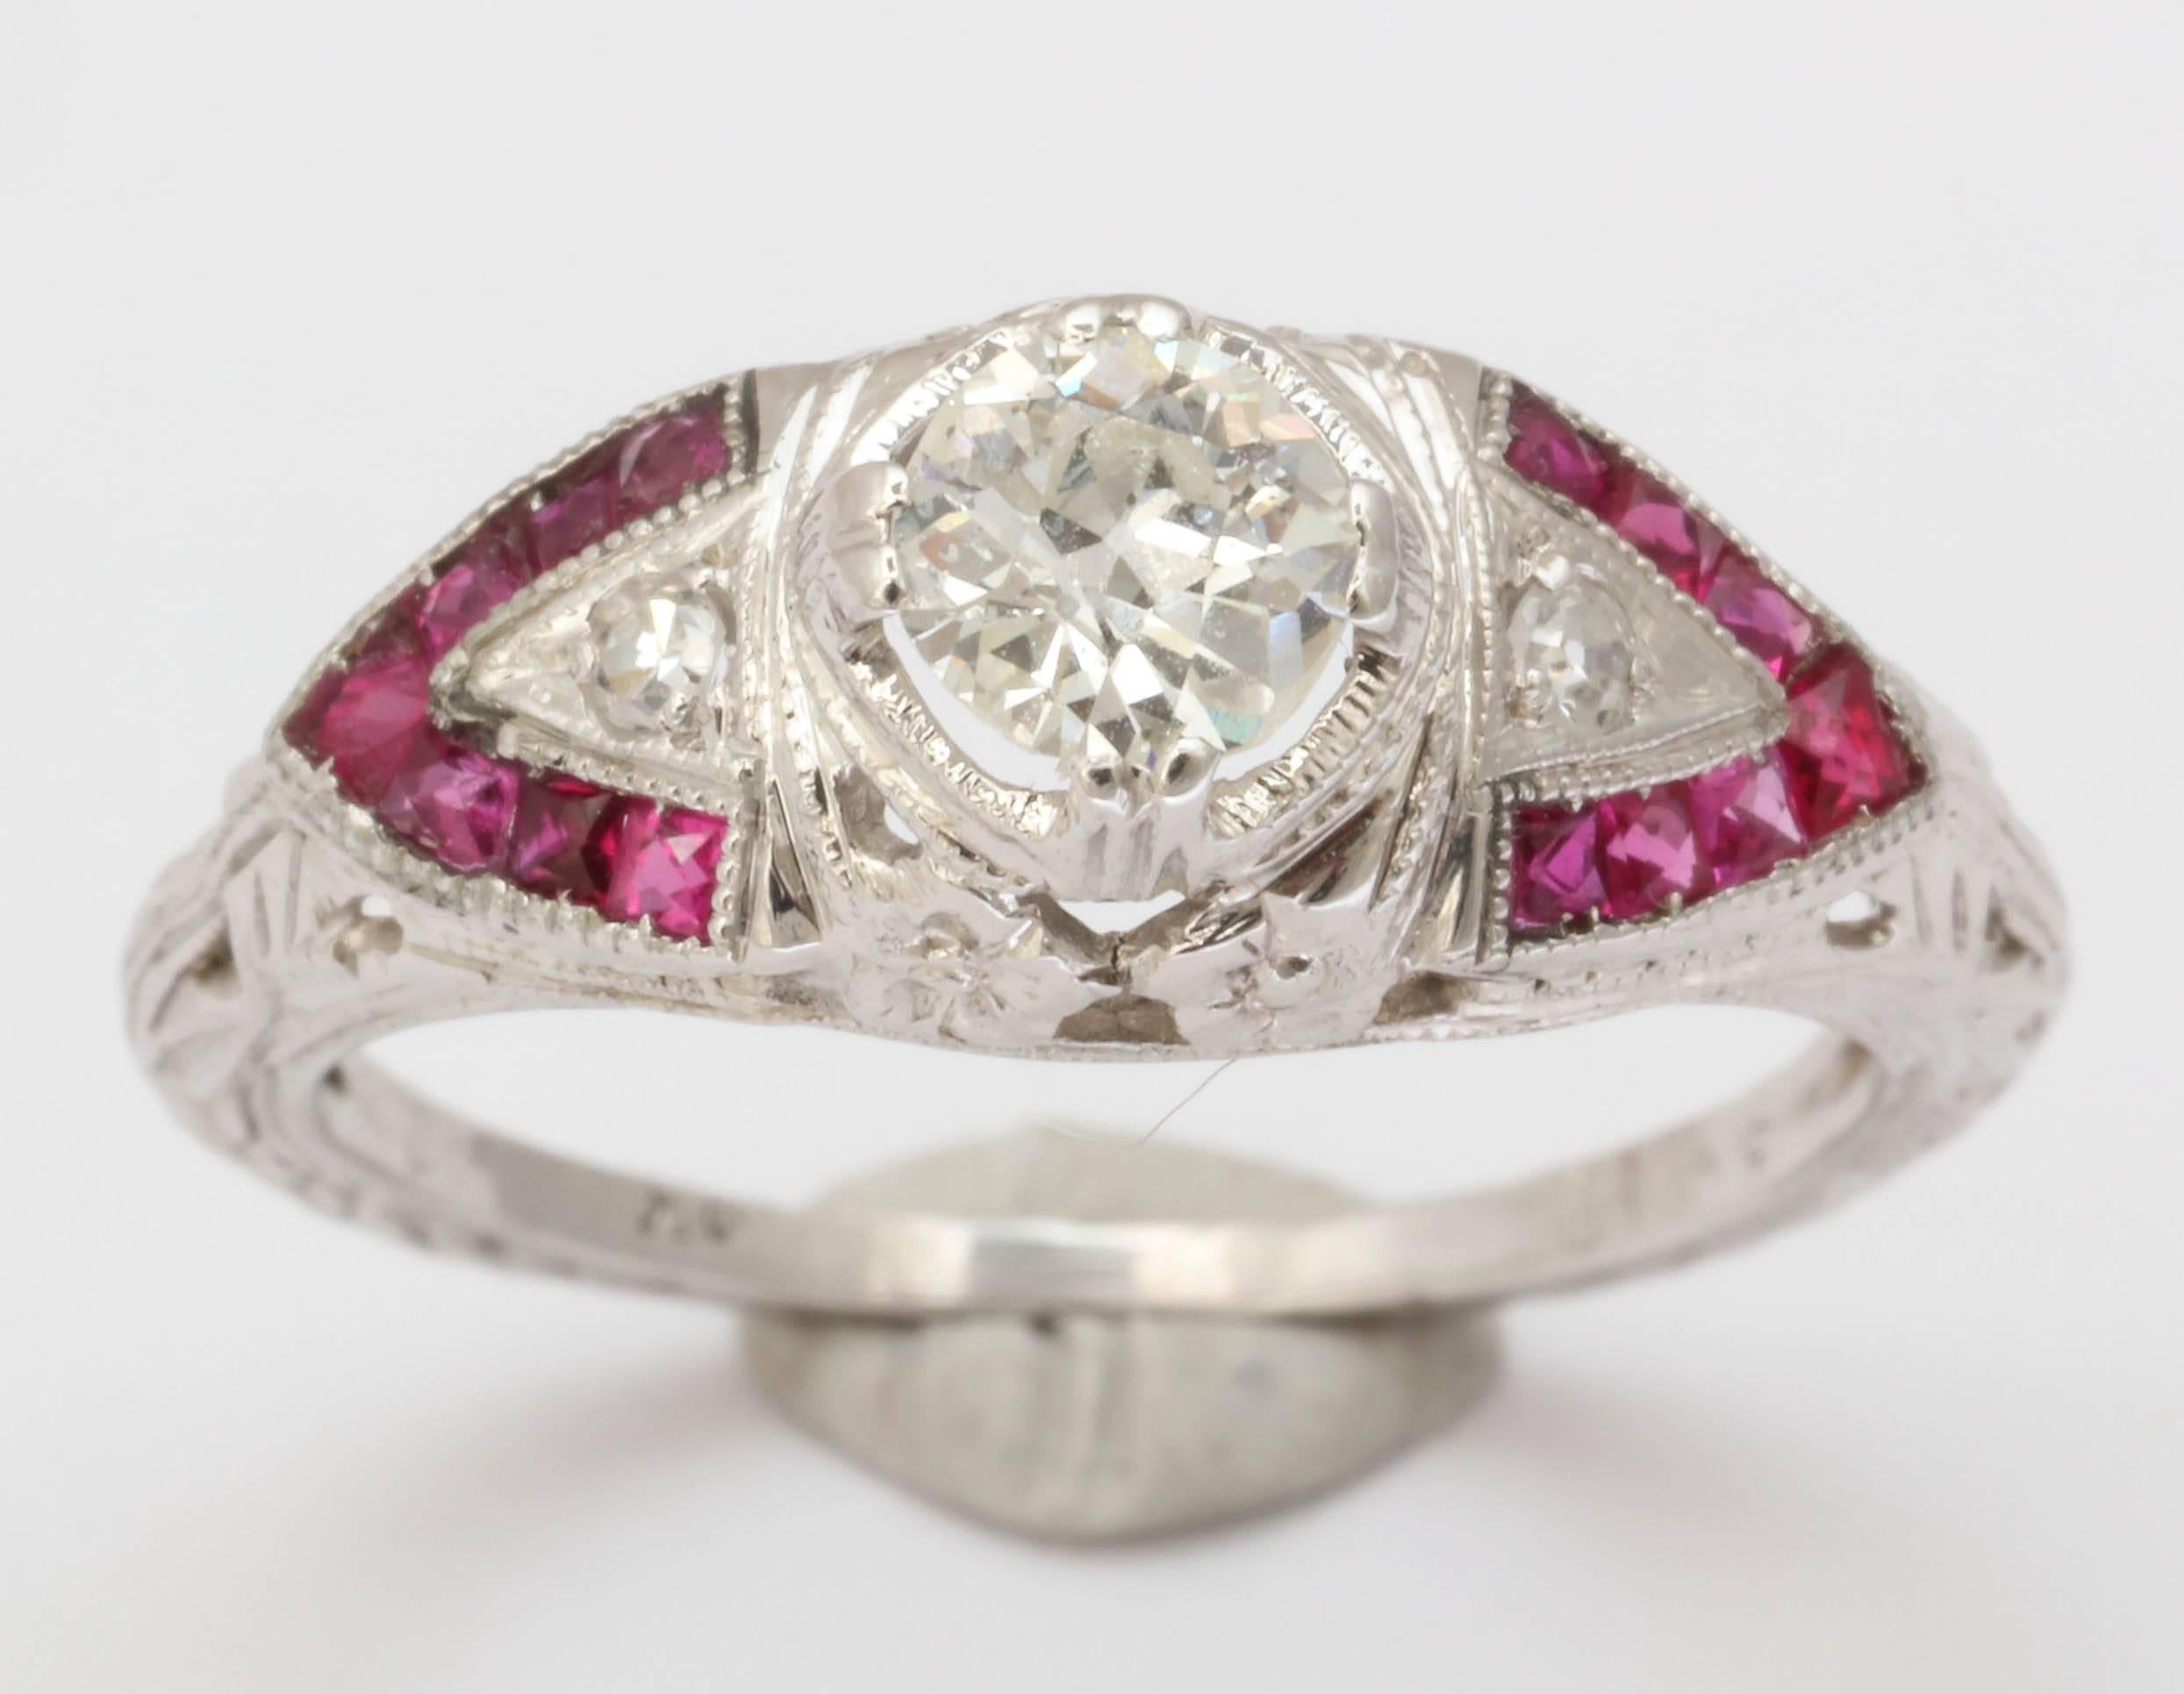 Flanked by a chevron of natural rubies a .35 kt Old European cut diamond sits  high, proudly in its 18kt white gold setting. The shank is beautifully engraved in a wheat pattern familiar to the Deco period. The clarity of the diamond is SI. The